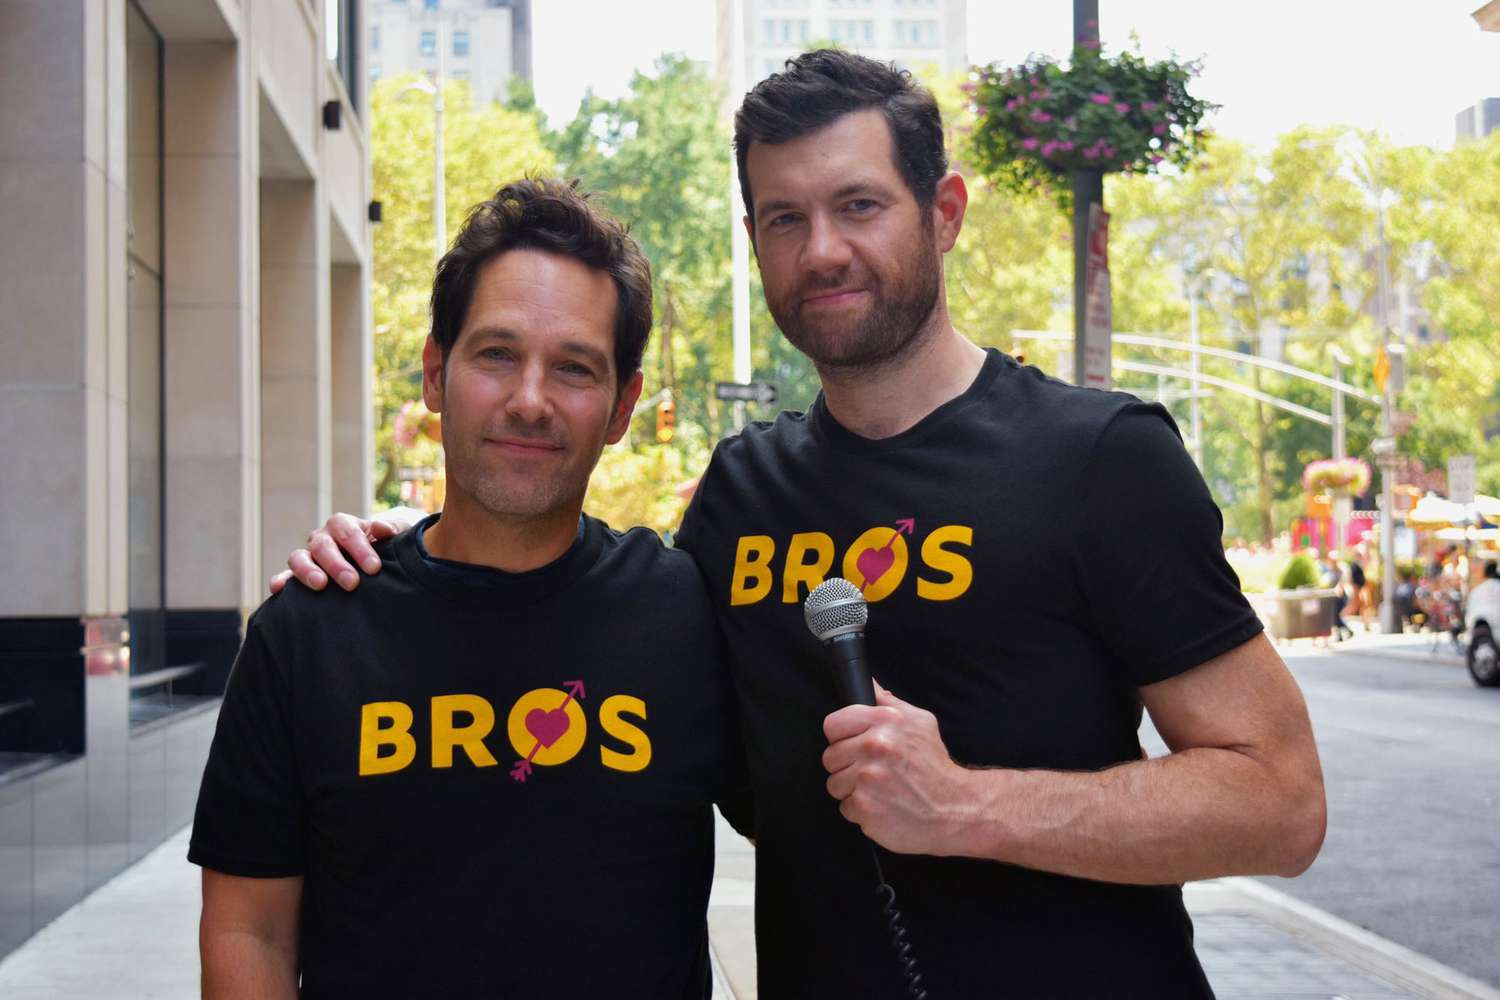 Paul Rudd and Billy Eichner for the Bros edition of Billy on the Street